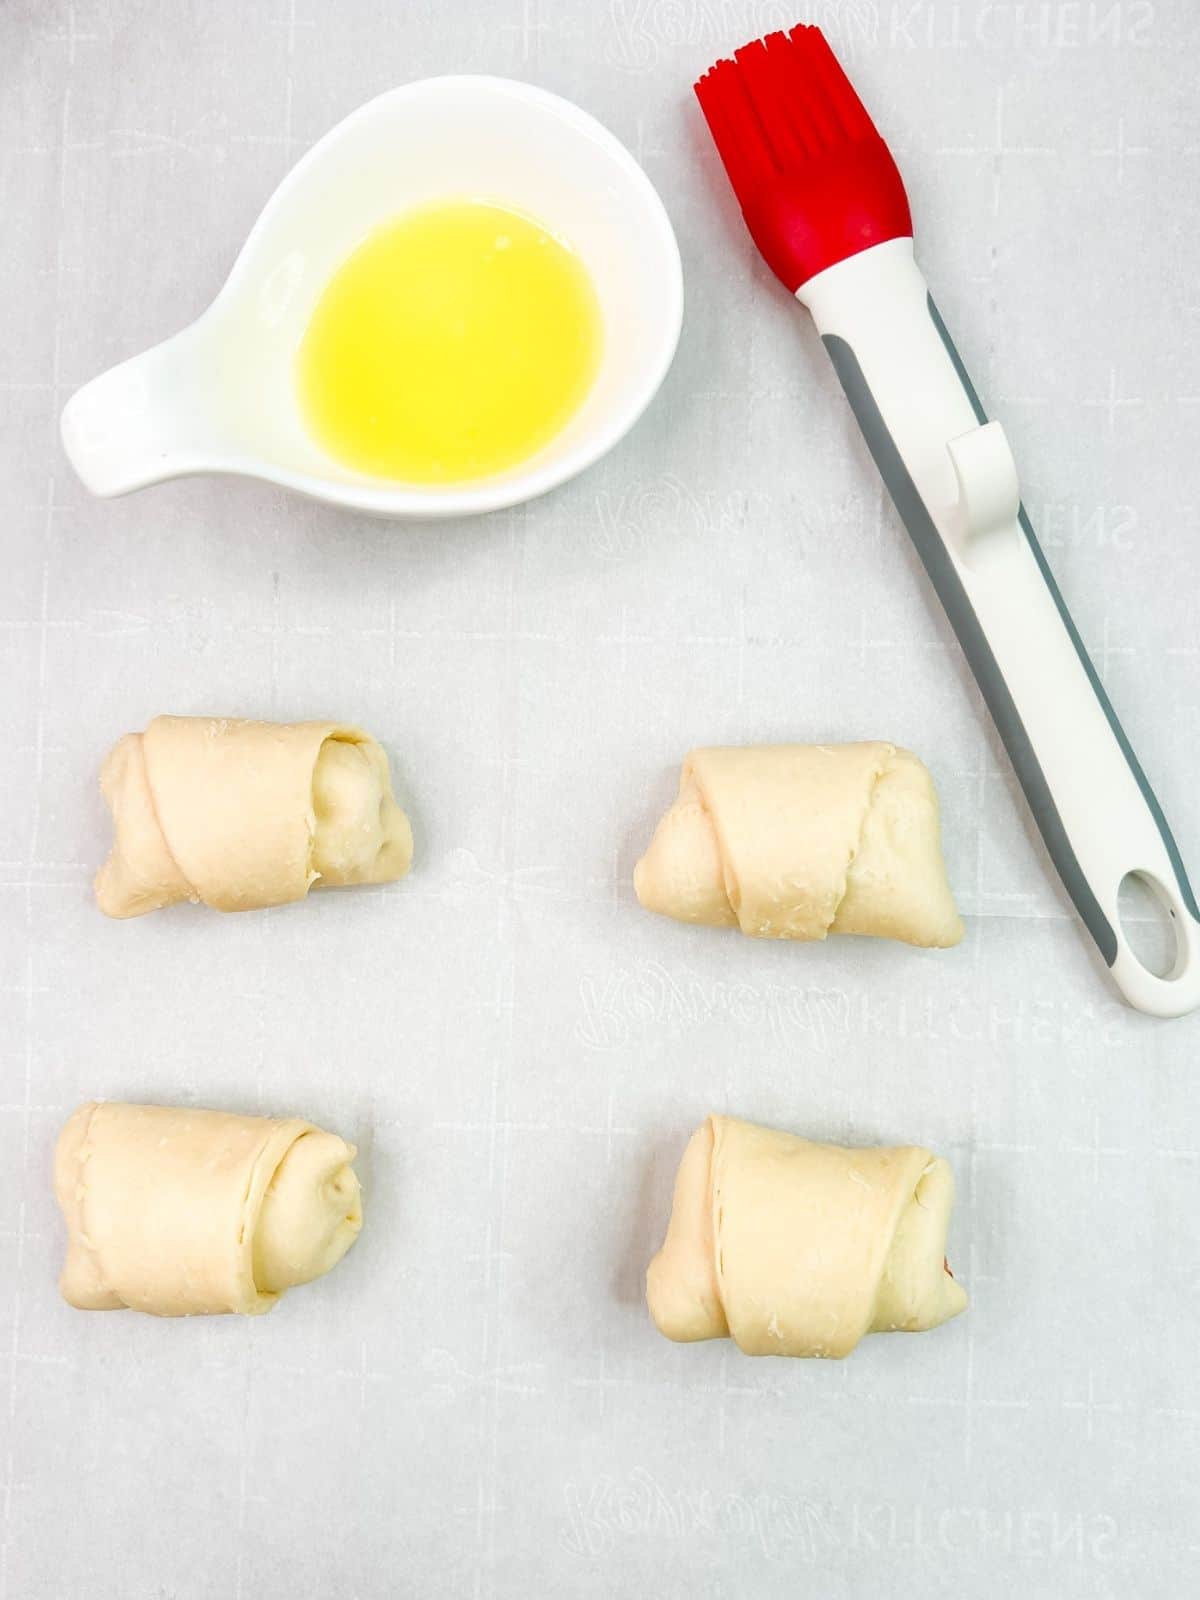 crescent roll bundles with melted butter in dish and silicone pastry brush.